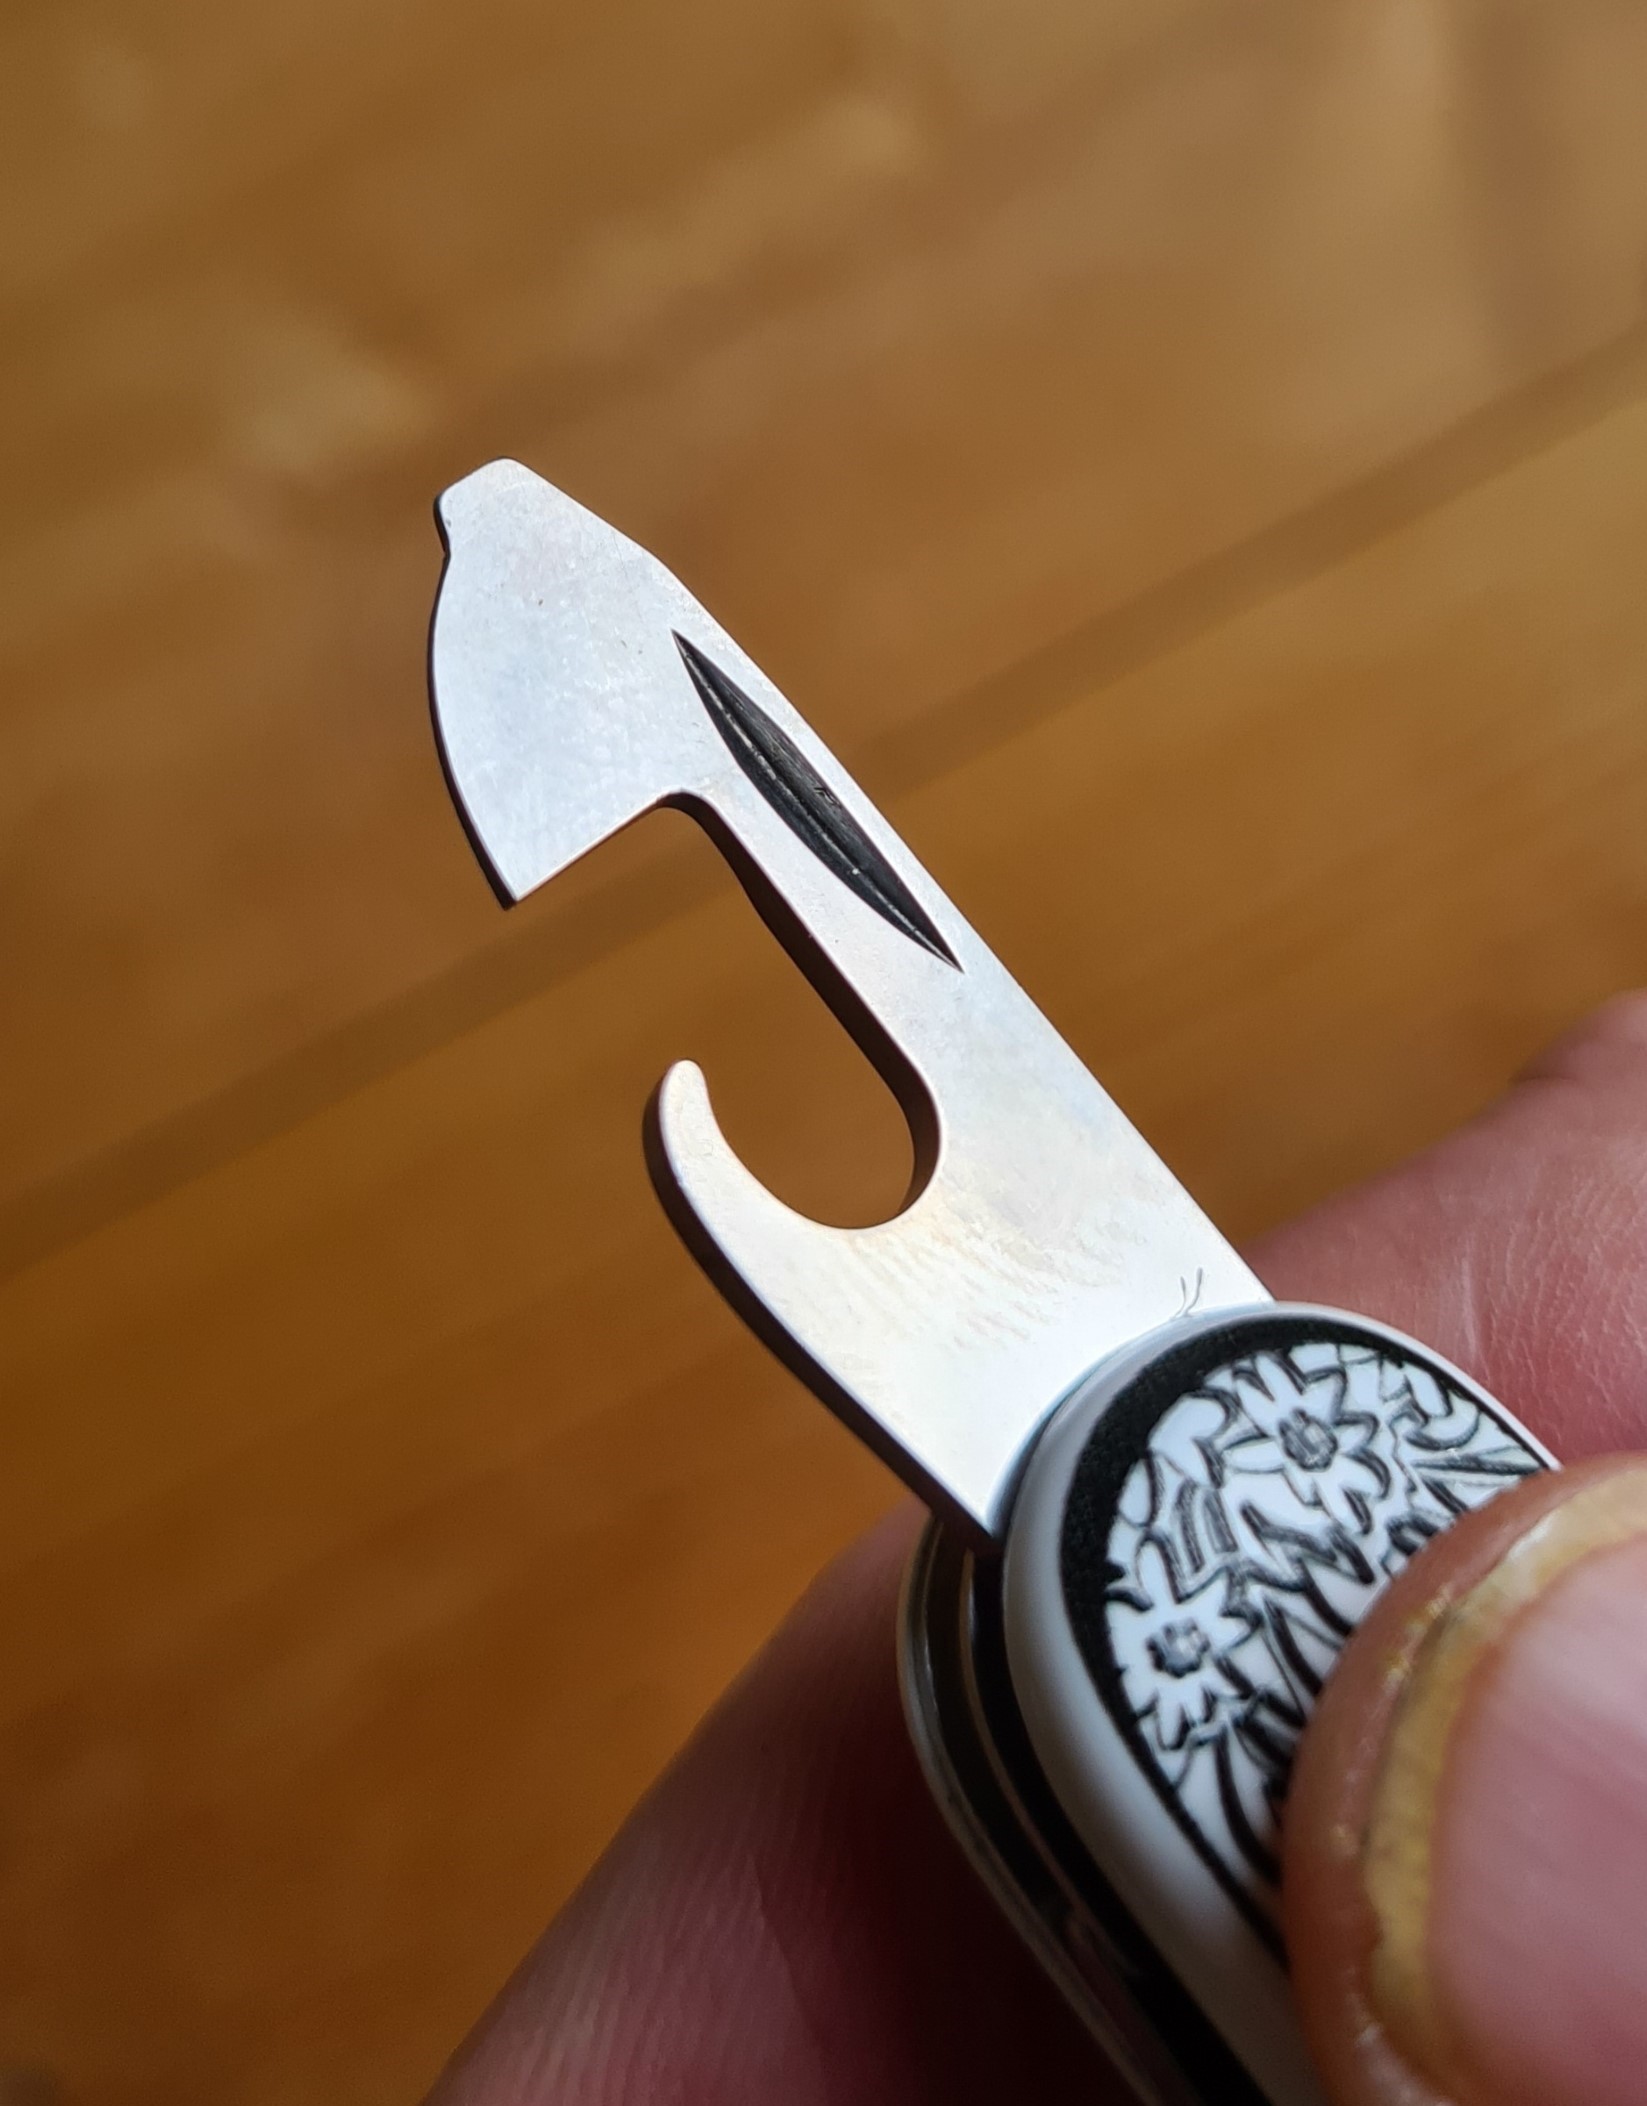 Tin/can opener, with small screwdriver tip